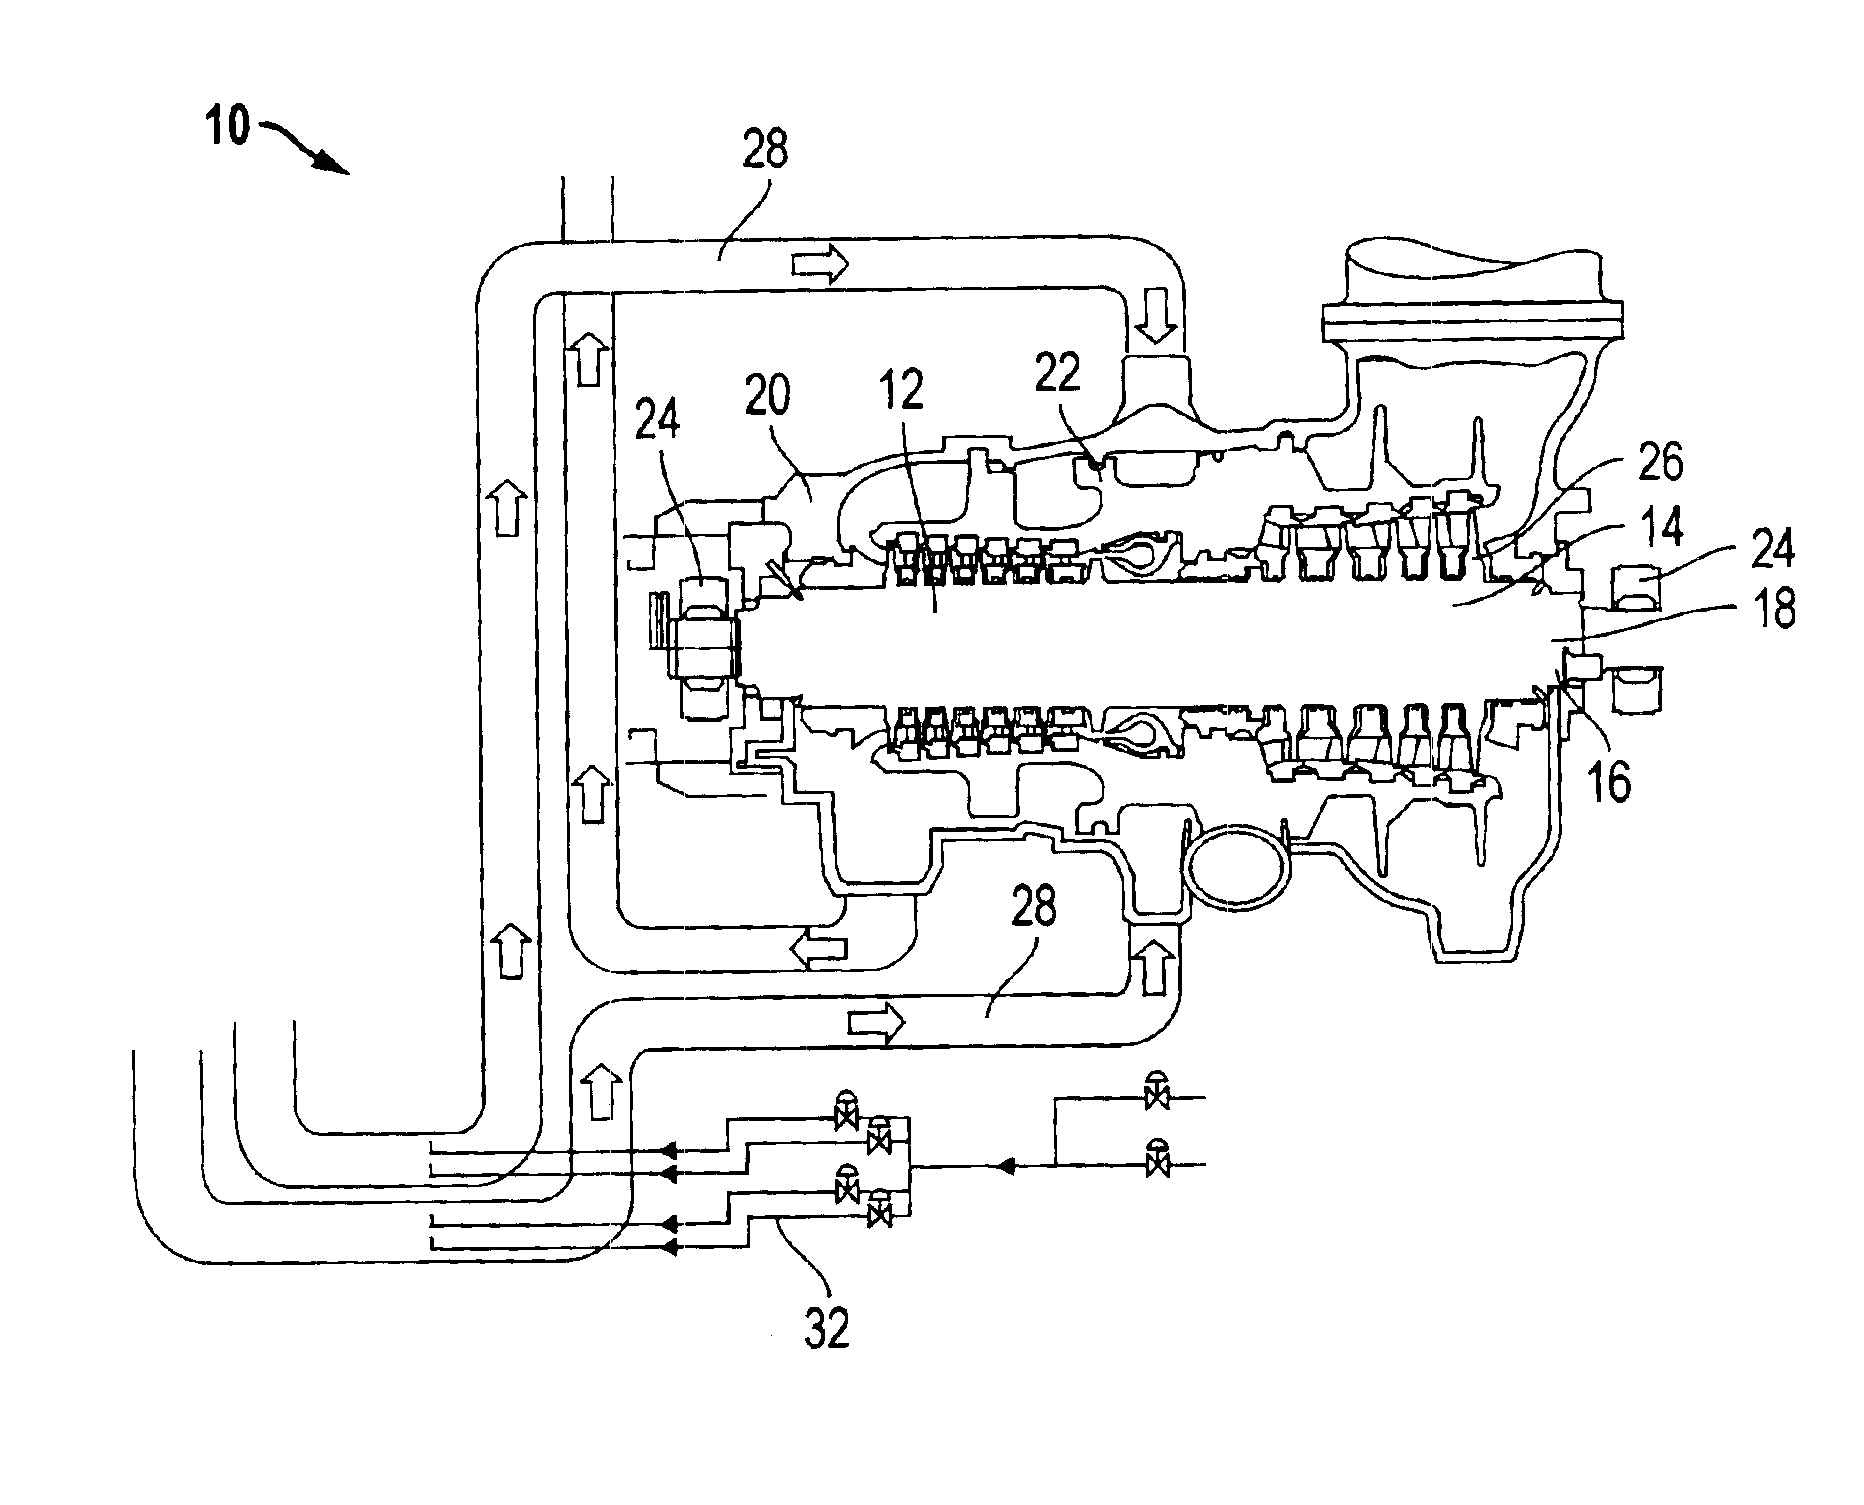 System and method of cooling steam turbines